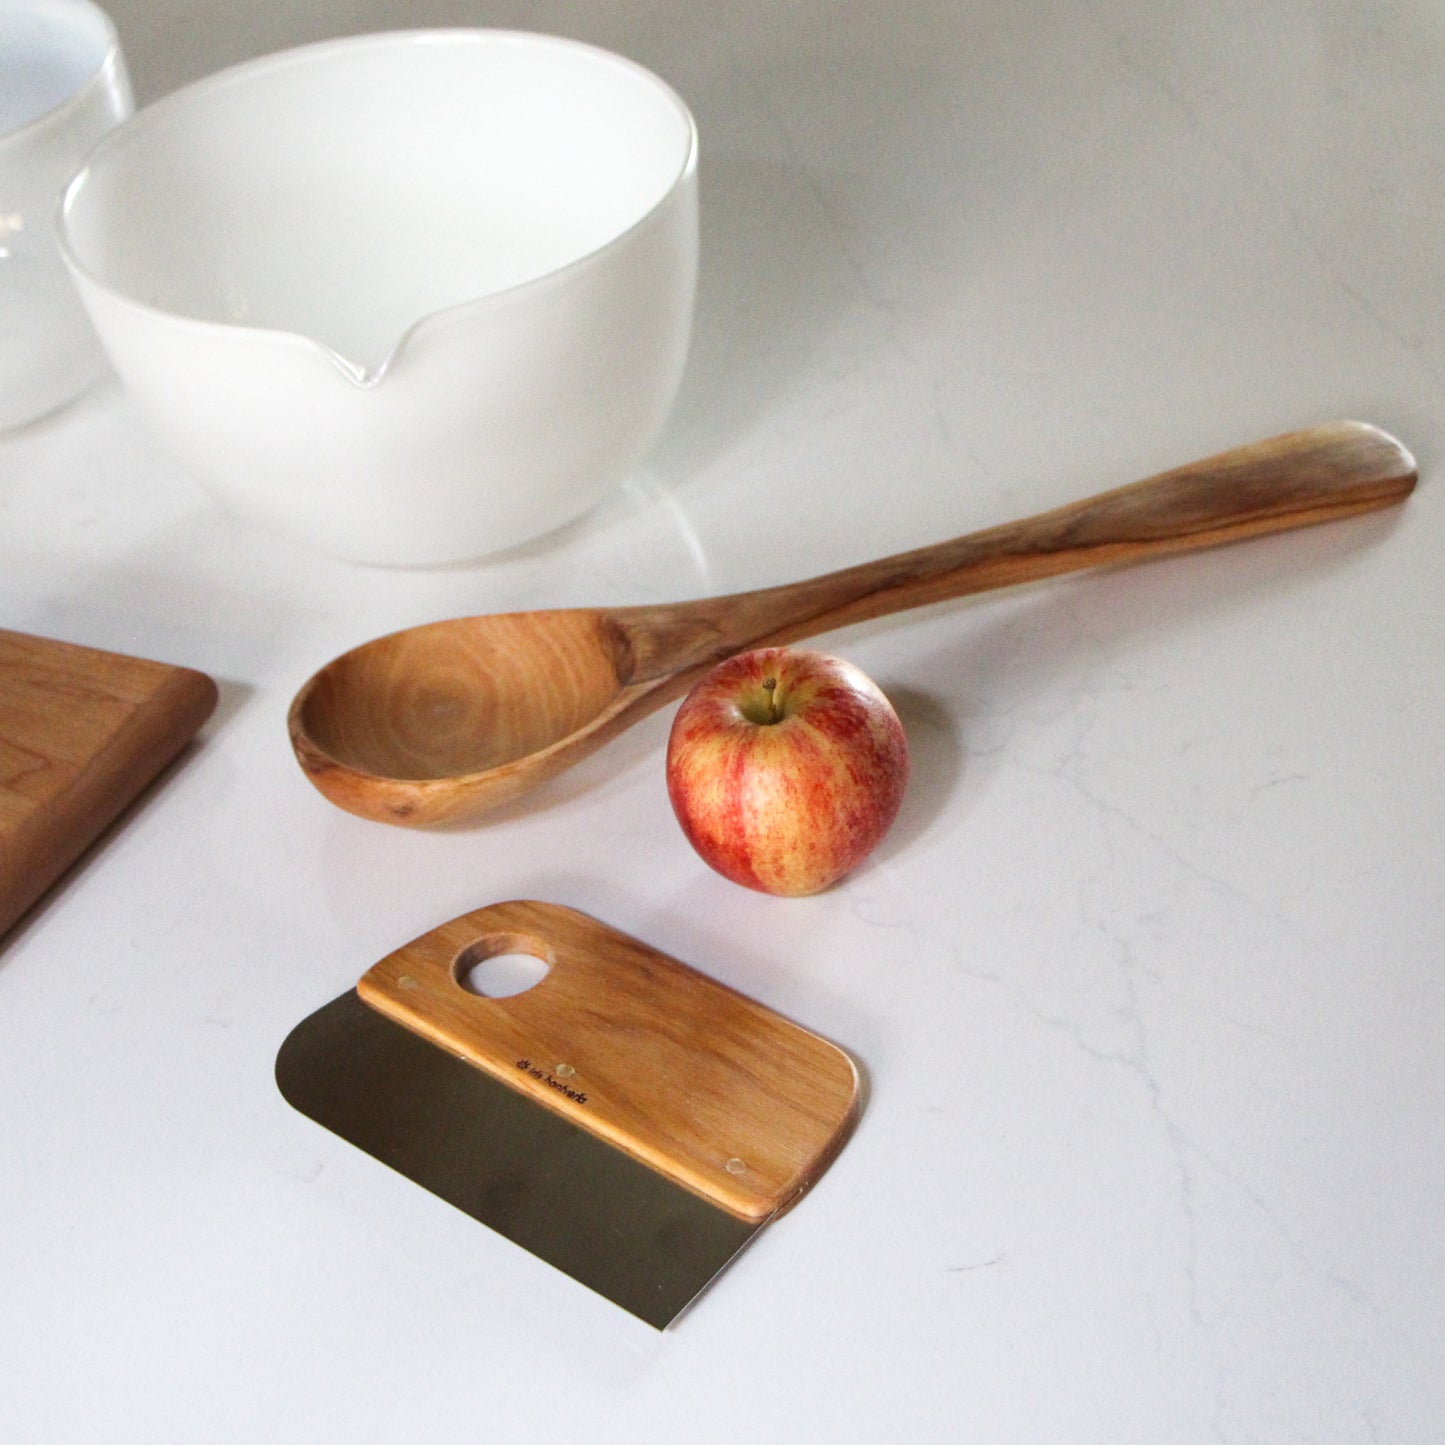 dough scraper with oil-treated birch handle and a strong stainless steel blade shown with glass mixing bowl and large wooden spoon